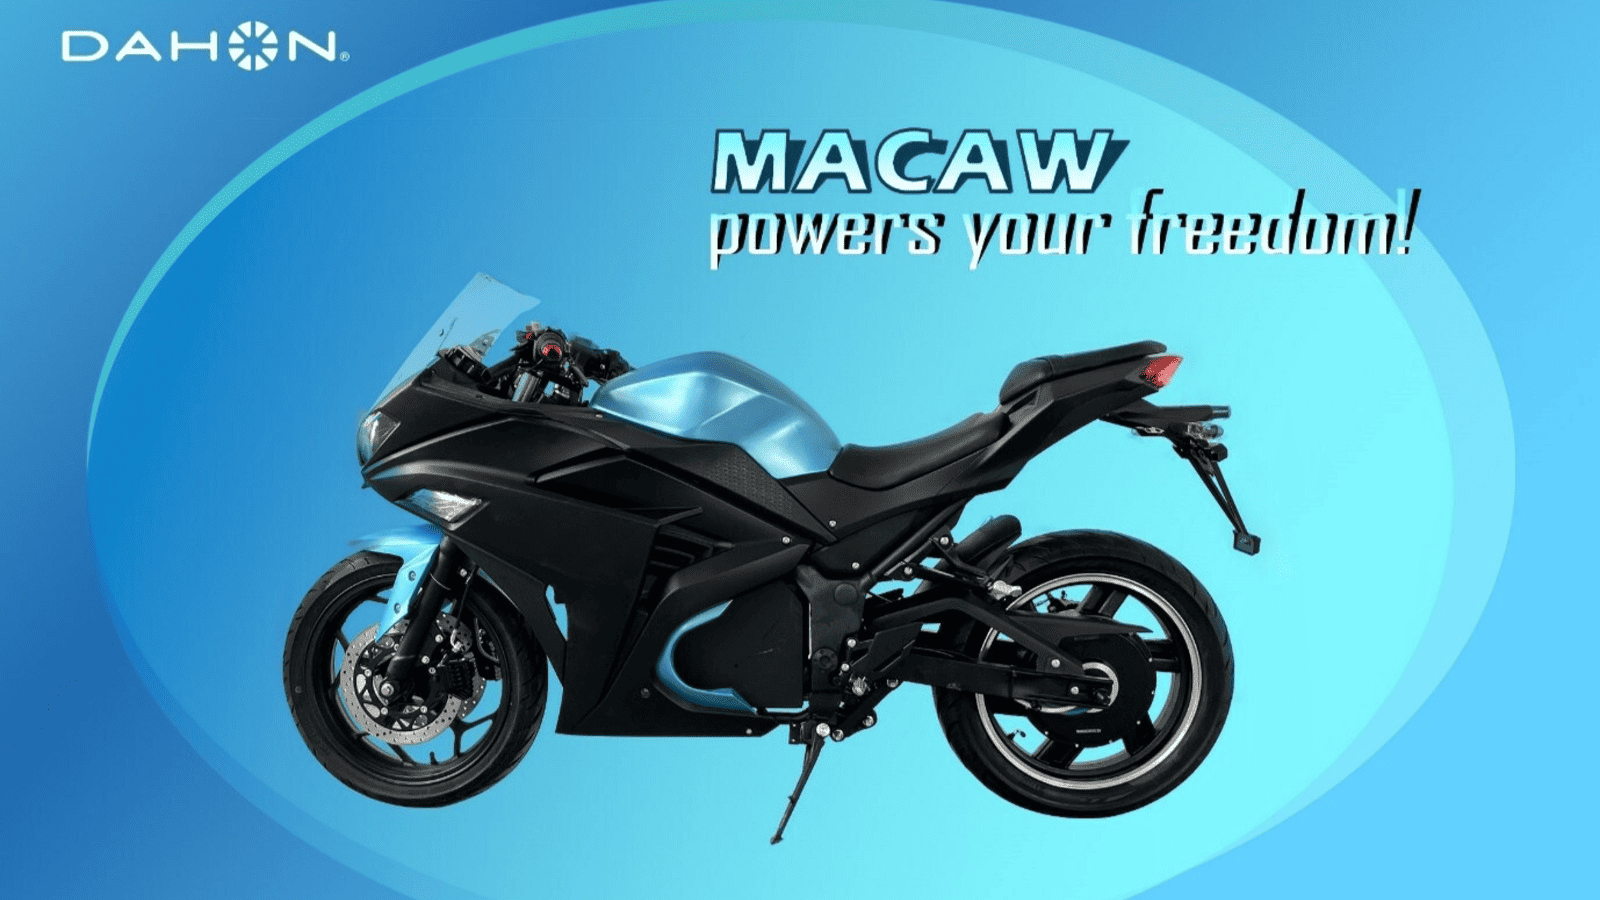 DAHON MACAW Electric Motorcycle black macaw powers your freedom